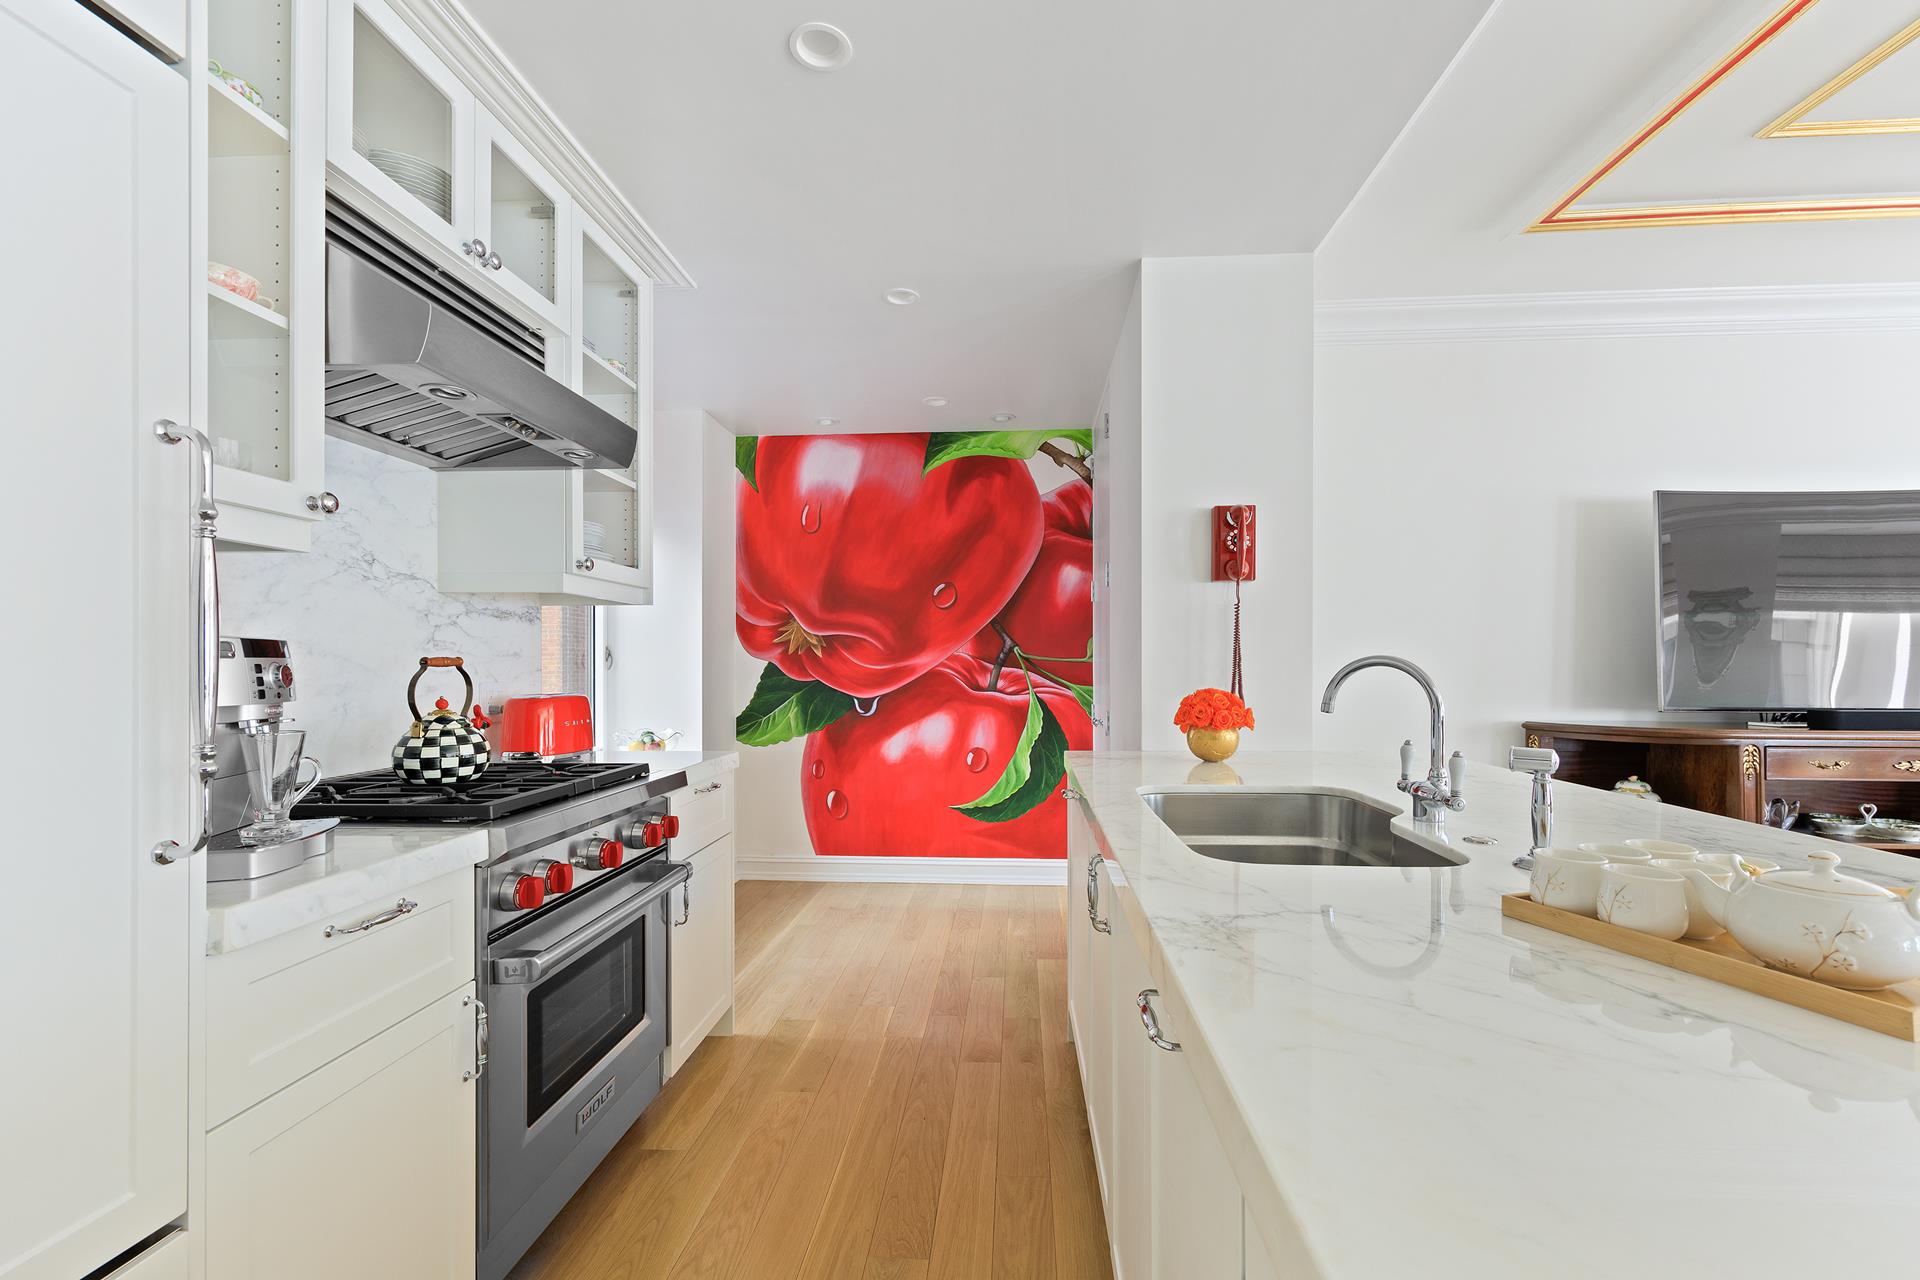 240 Riverside Boulevard 3Lm, Lincoln Sq, Upper West Side, NYC - 2 Bedrooms  
2.5 Bathrooms  
6 Rooms - 